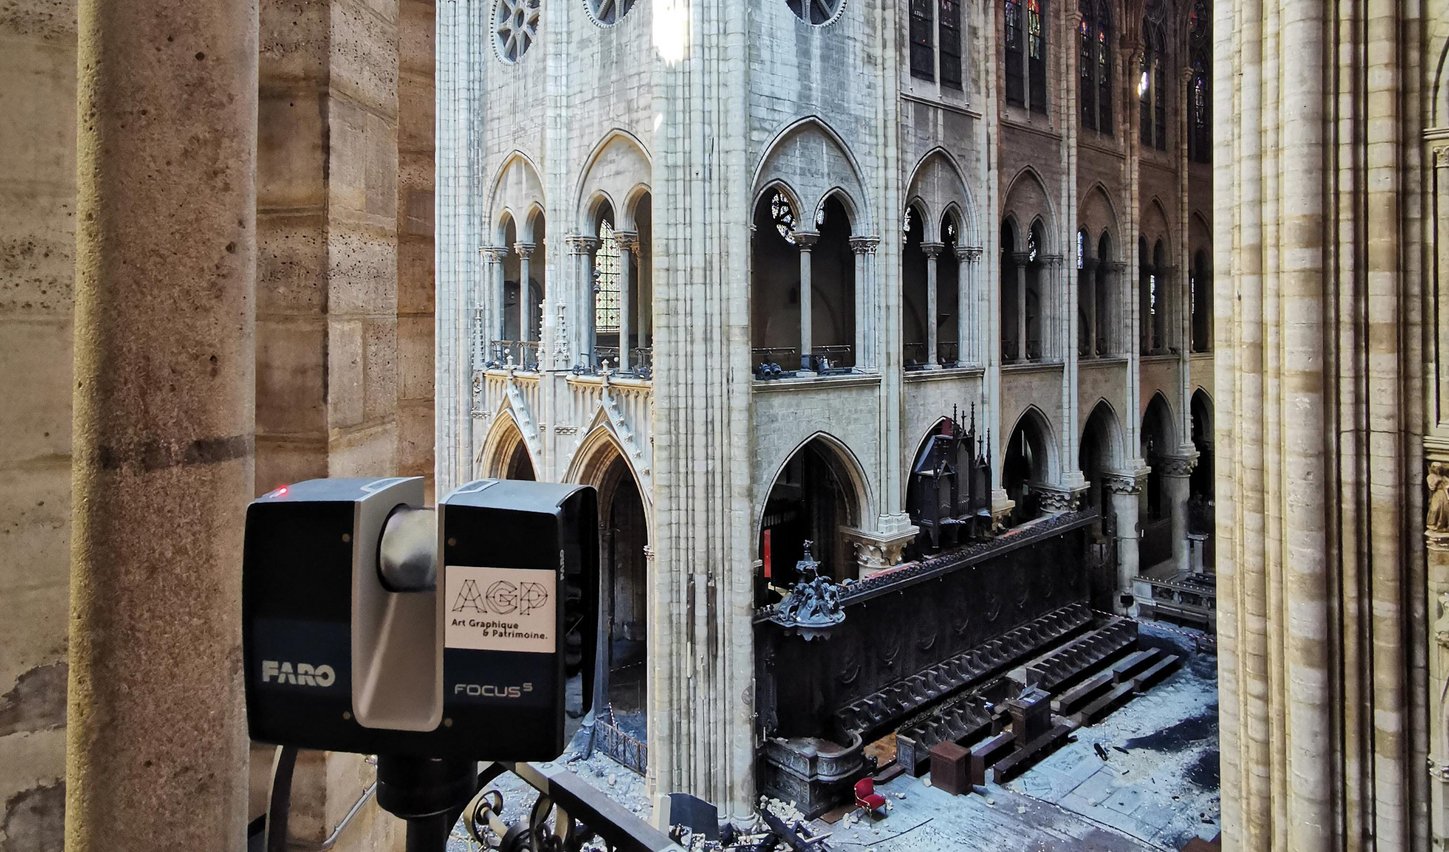 Photo of a camera collecting data and images inside Notre-Dame.